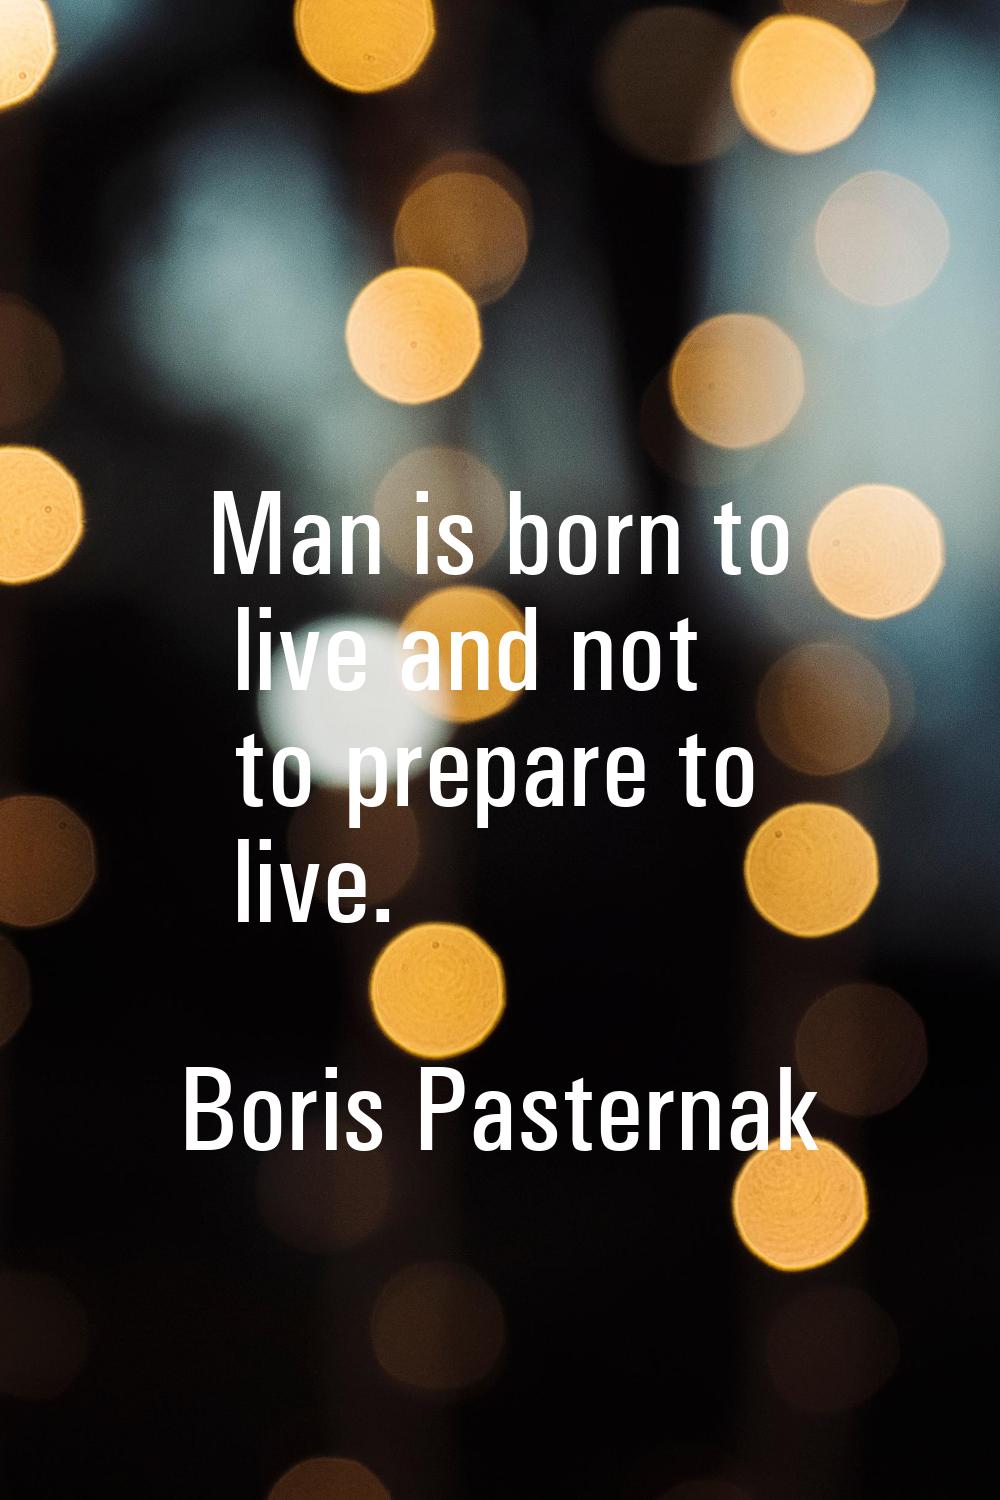 Man is born to live and not to prepare to live.